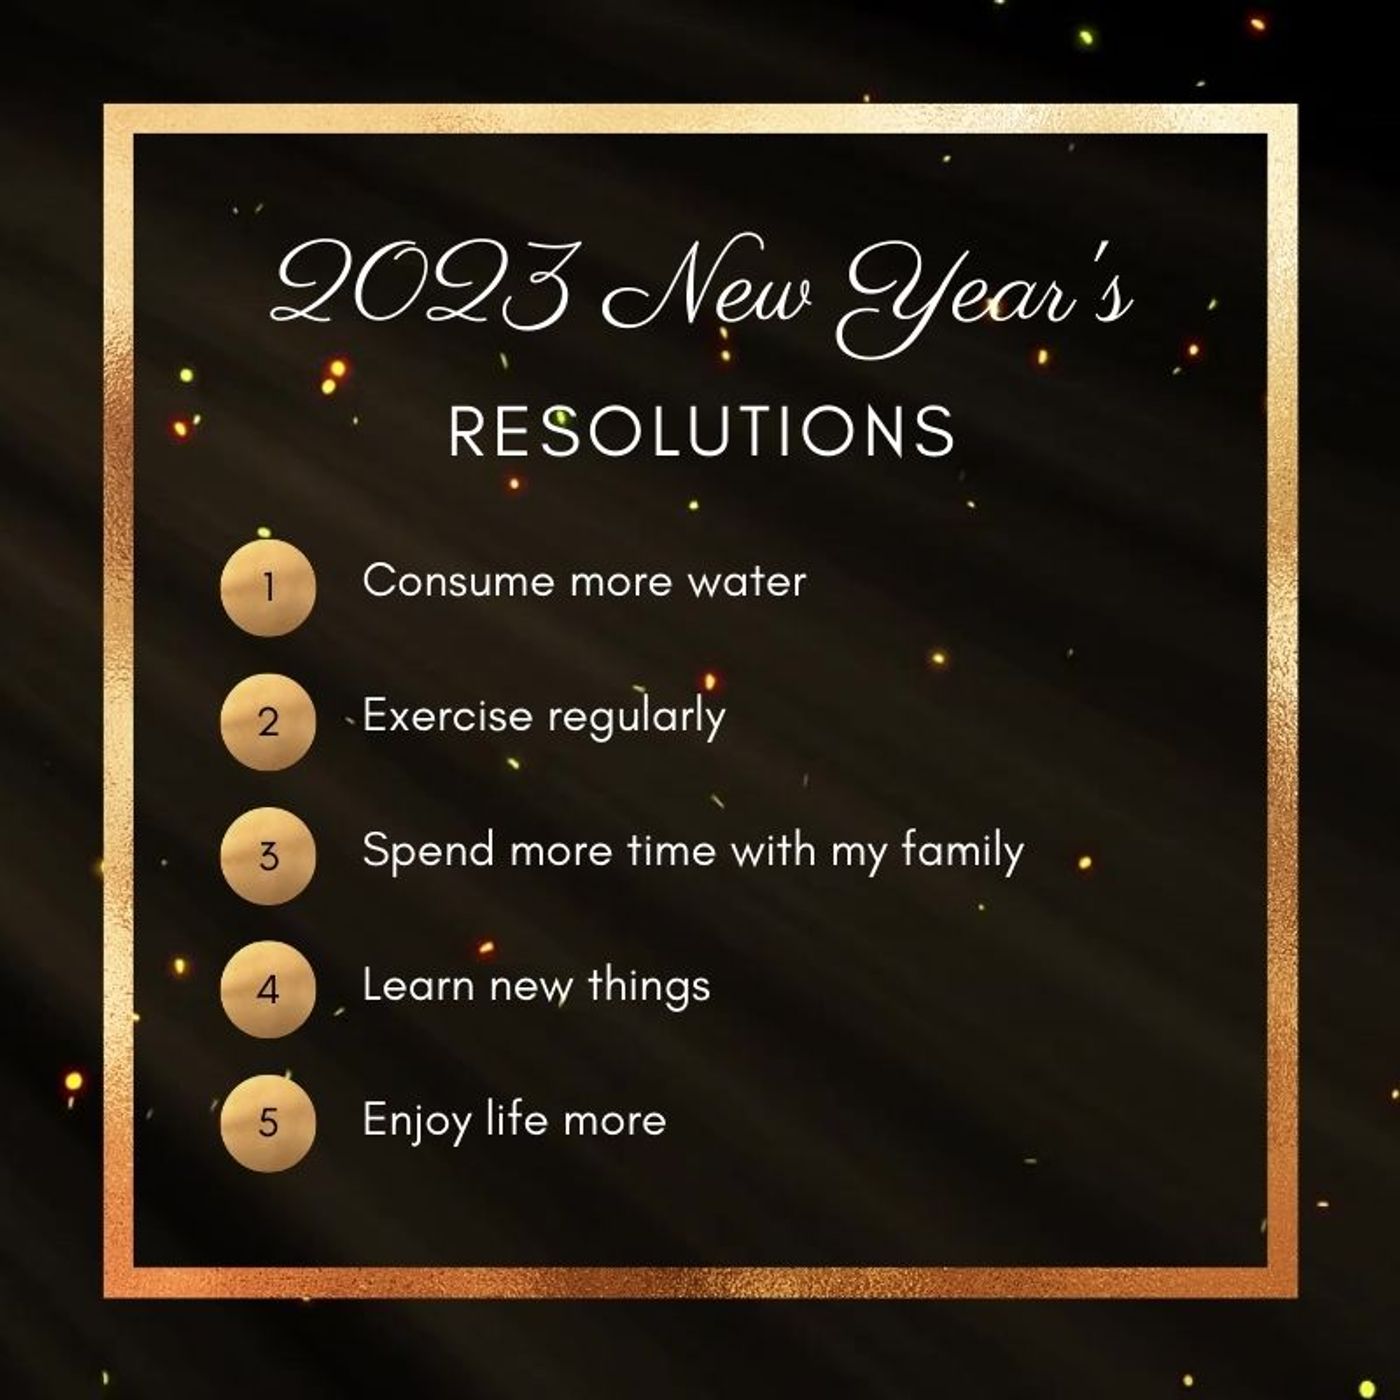 What's Your 2023 News Resolution Or Did You Make Any?